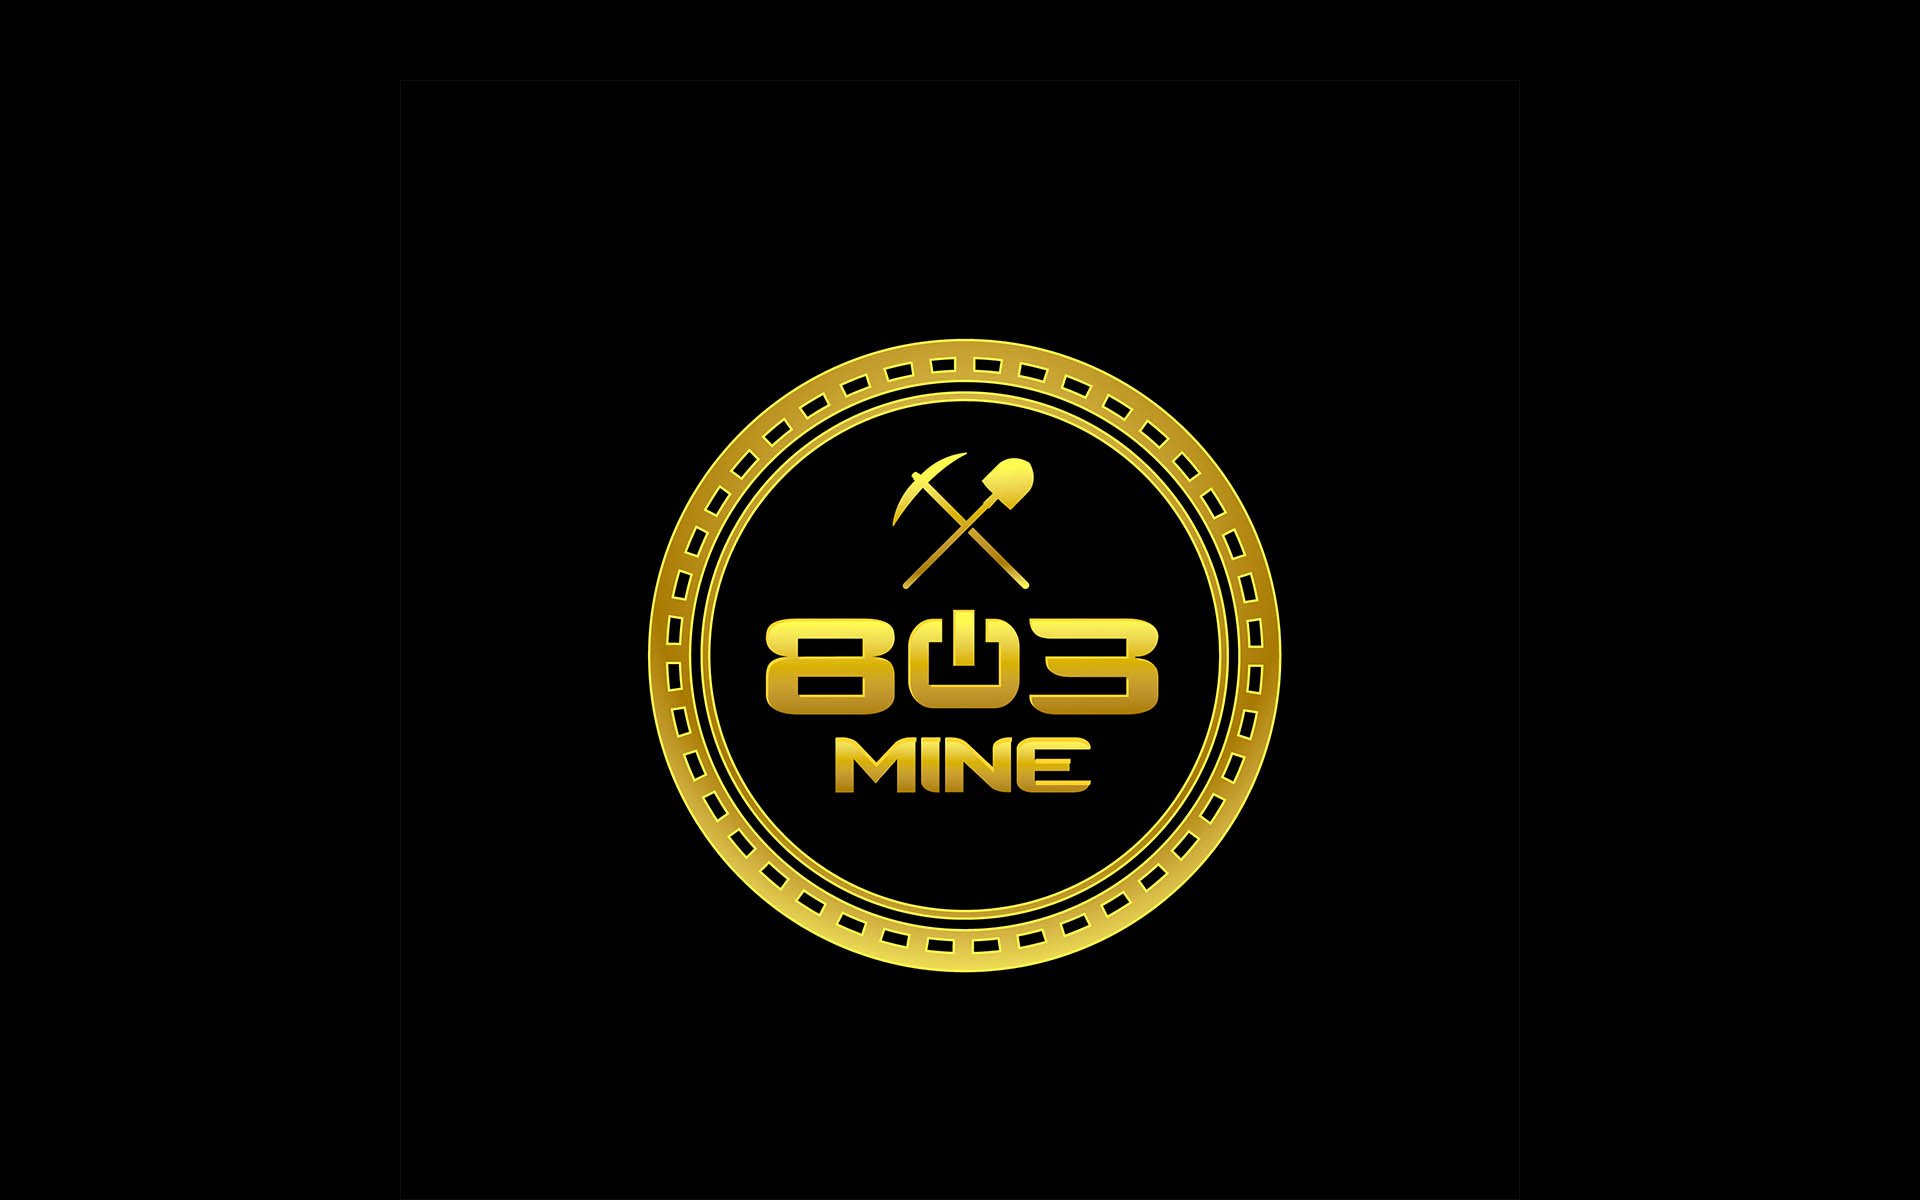 803 Mine Launches ICO Pre-Sale - Forever Changes Bitcoin Investing